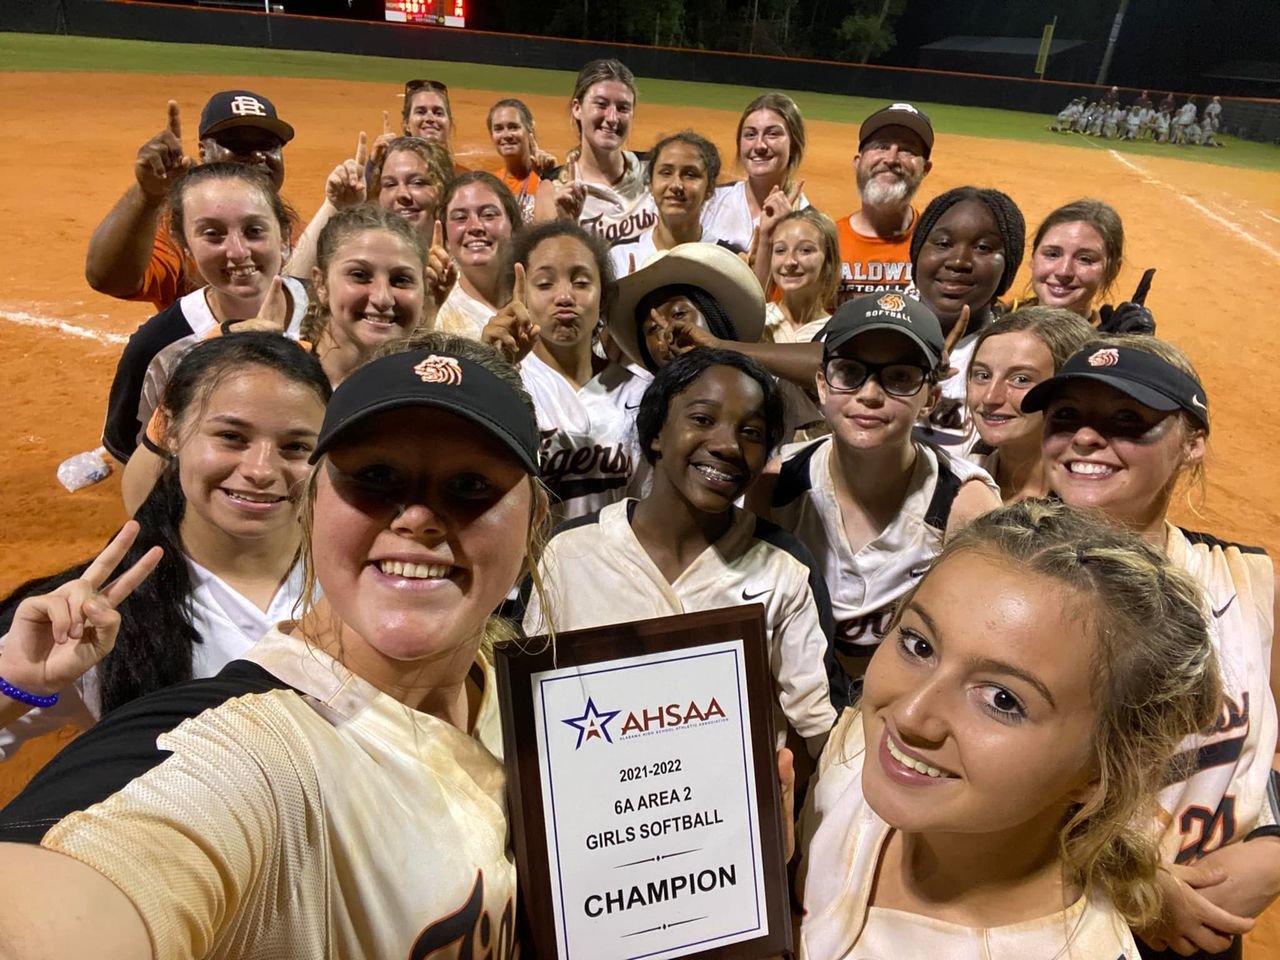 The Baldwin County Tigers bounced back from an opening-round loss and beat Robertsdale twice to win the Class 6A Area 2 Championship May 4.